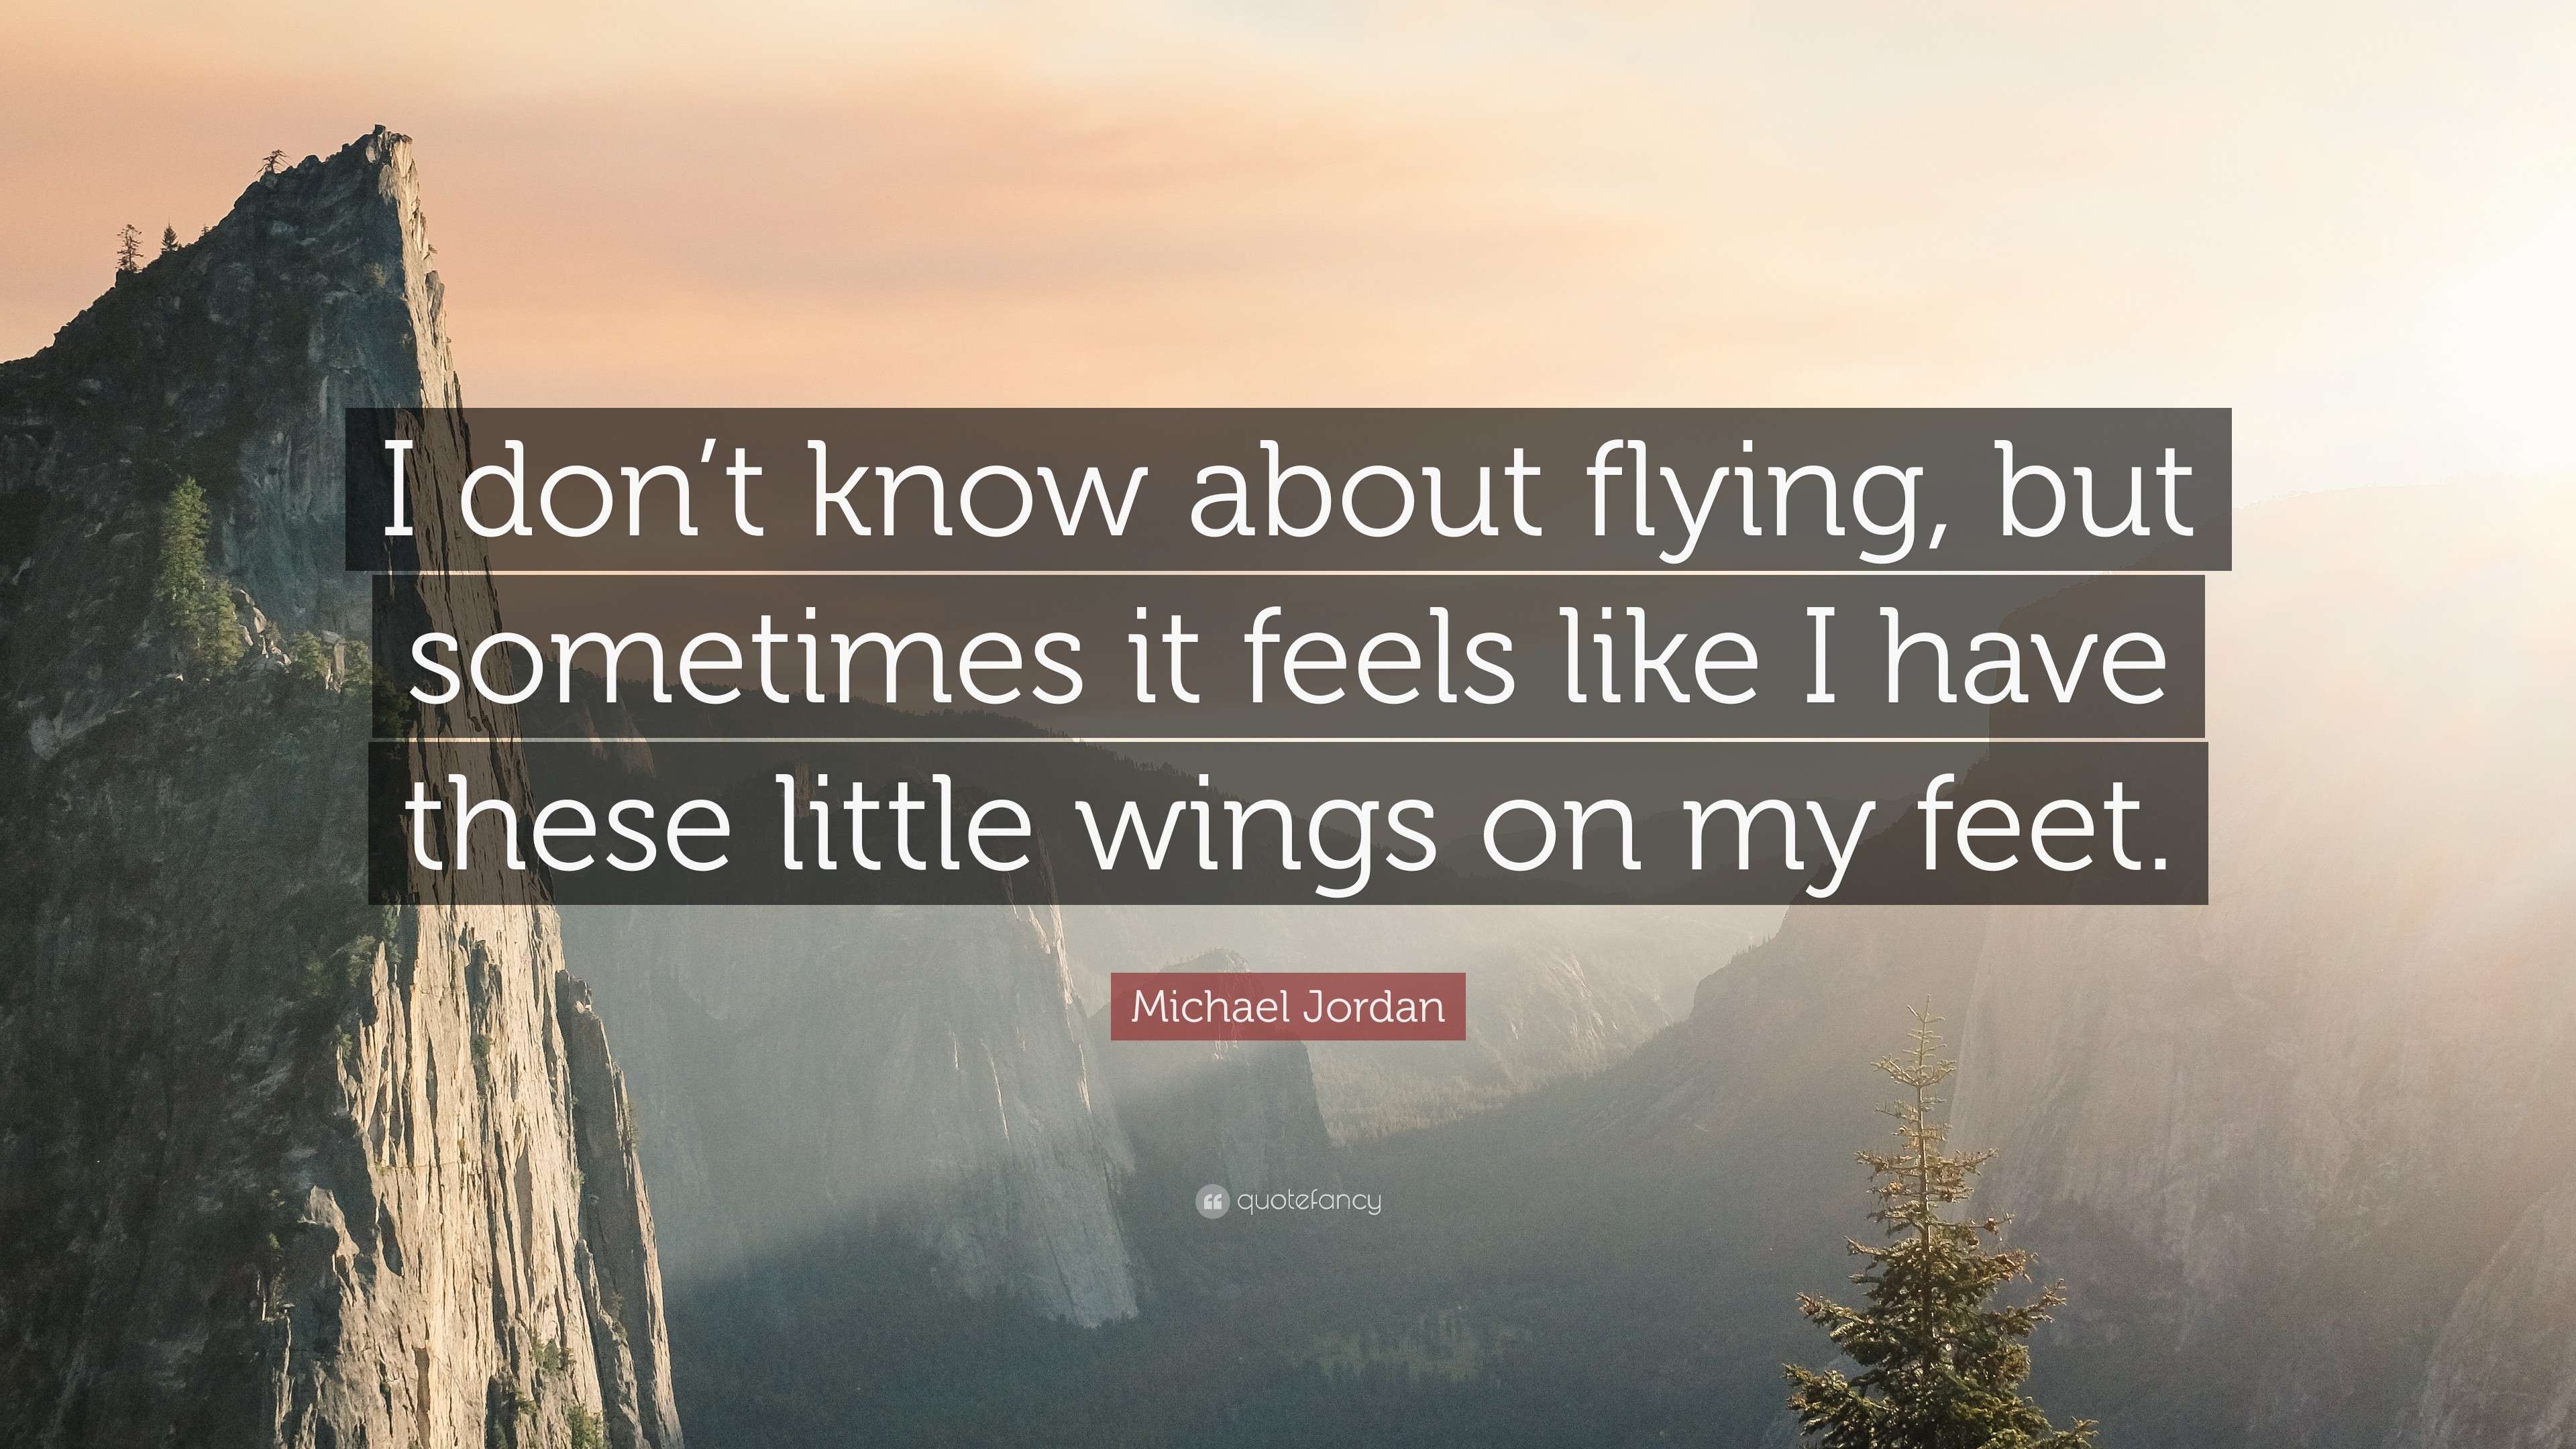 3840x2160 Michael Jordan Quote: “I don't know about flying, but sometimes it